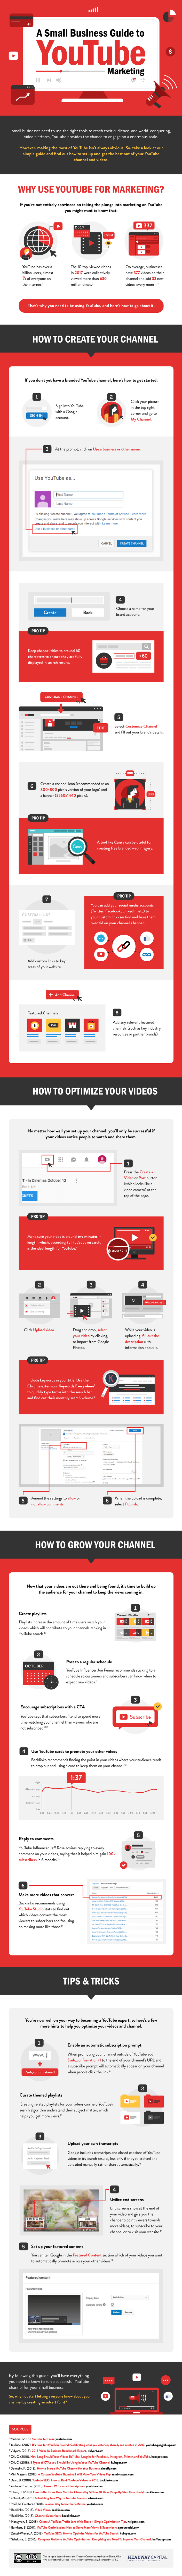 A Small Business Guide to YouTube Marketing